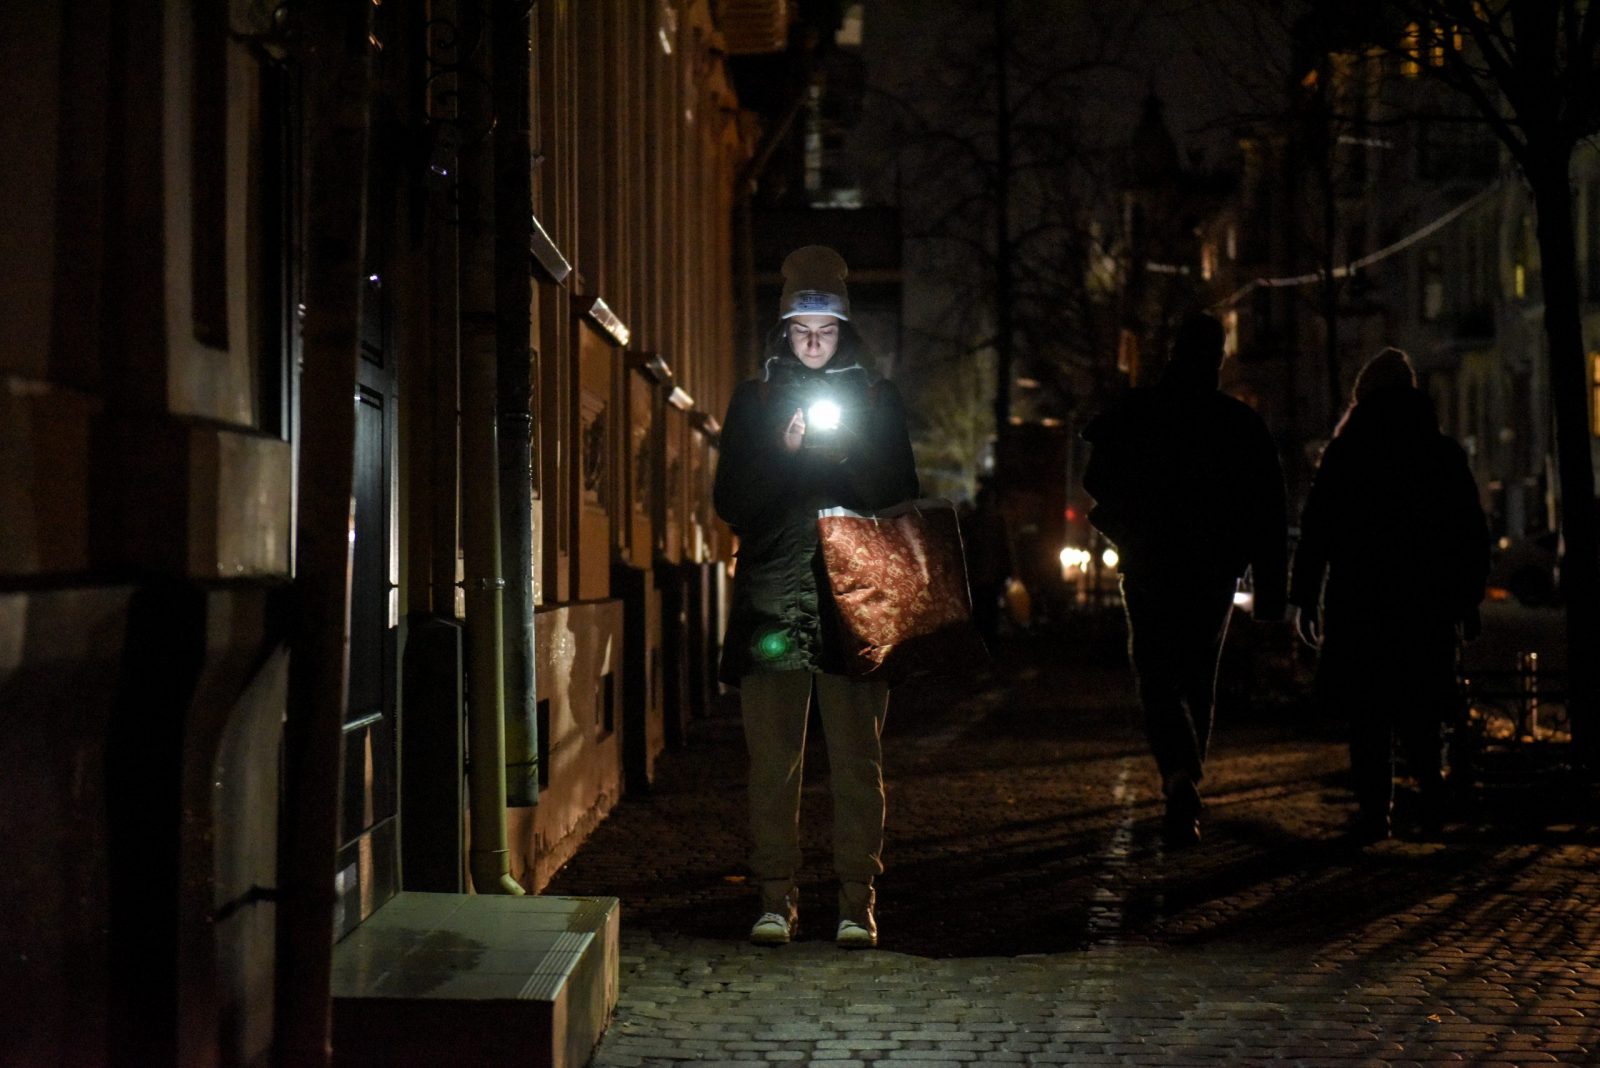 epa10379408 A woman uses her smartphone on the street while the lights are switched off in Kyiv, Ukraine, 27 December 2022. Russian troops on 24 February entered Ukrainian territory, starting a conflict that has provoked destruction and a humanitarian crisis.  EPA/OLEG PETRASYUK